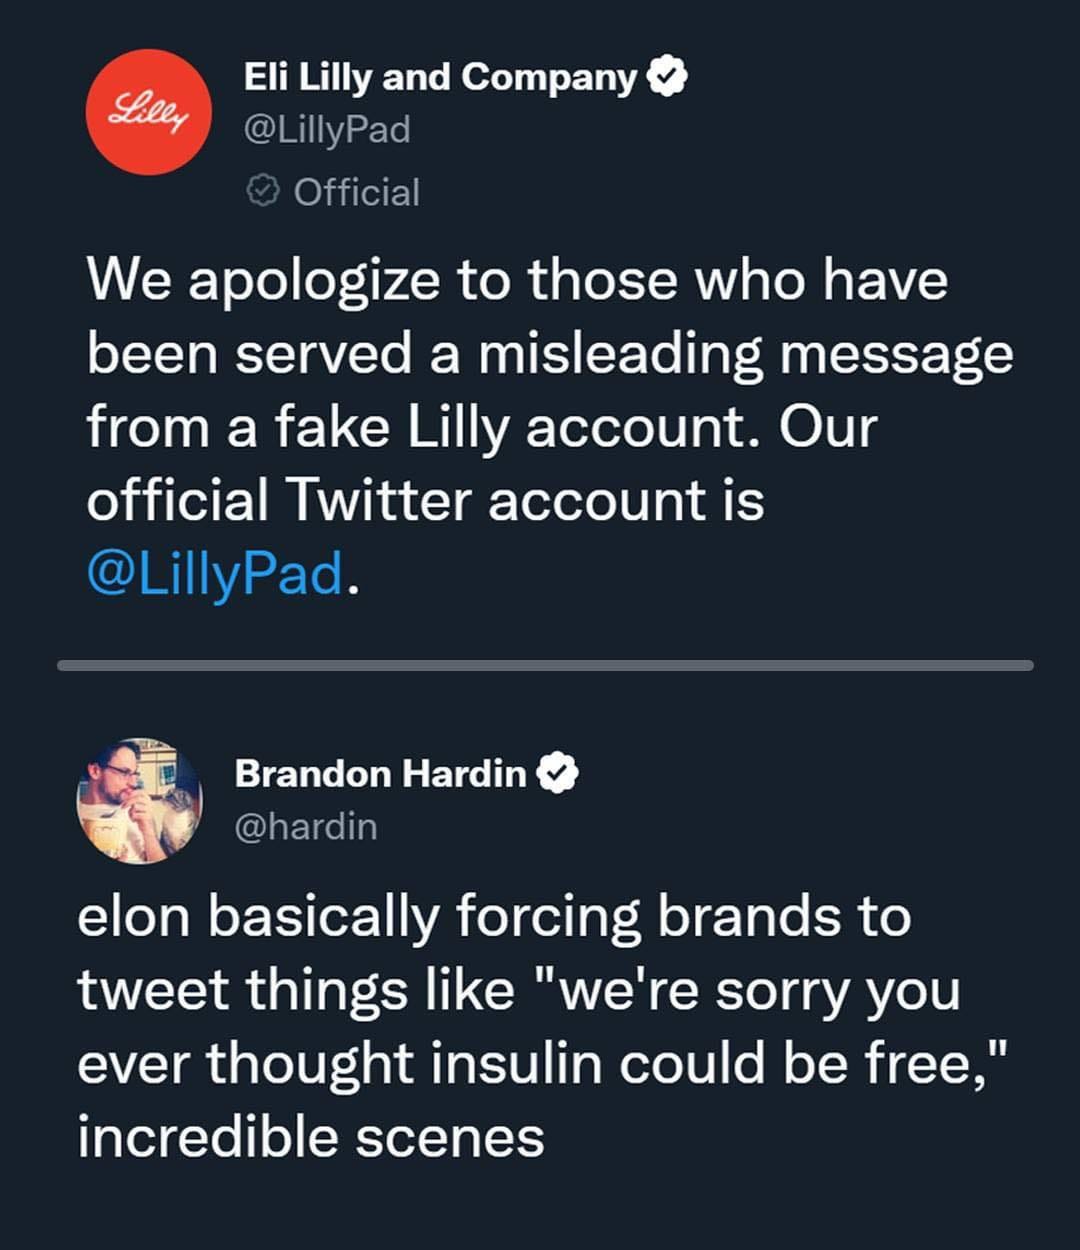 May be a Twitter screenshot of 1 person and text that says "Lilly Eli Lilly and Company @LillyPad Official We apologize to those who have been served a misleading message from a fake Lilly account. Our official Twitter account is @LillyPad. Brandon Hardin @hardin elon basically forcing brands to tweet things like "we're sorry you ever thought insulin could be free," incredible scenes"